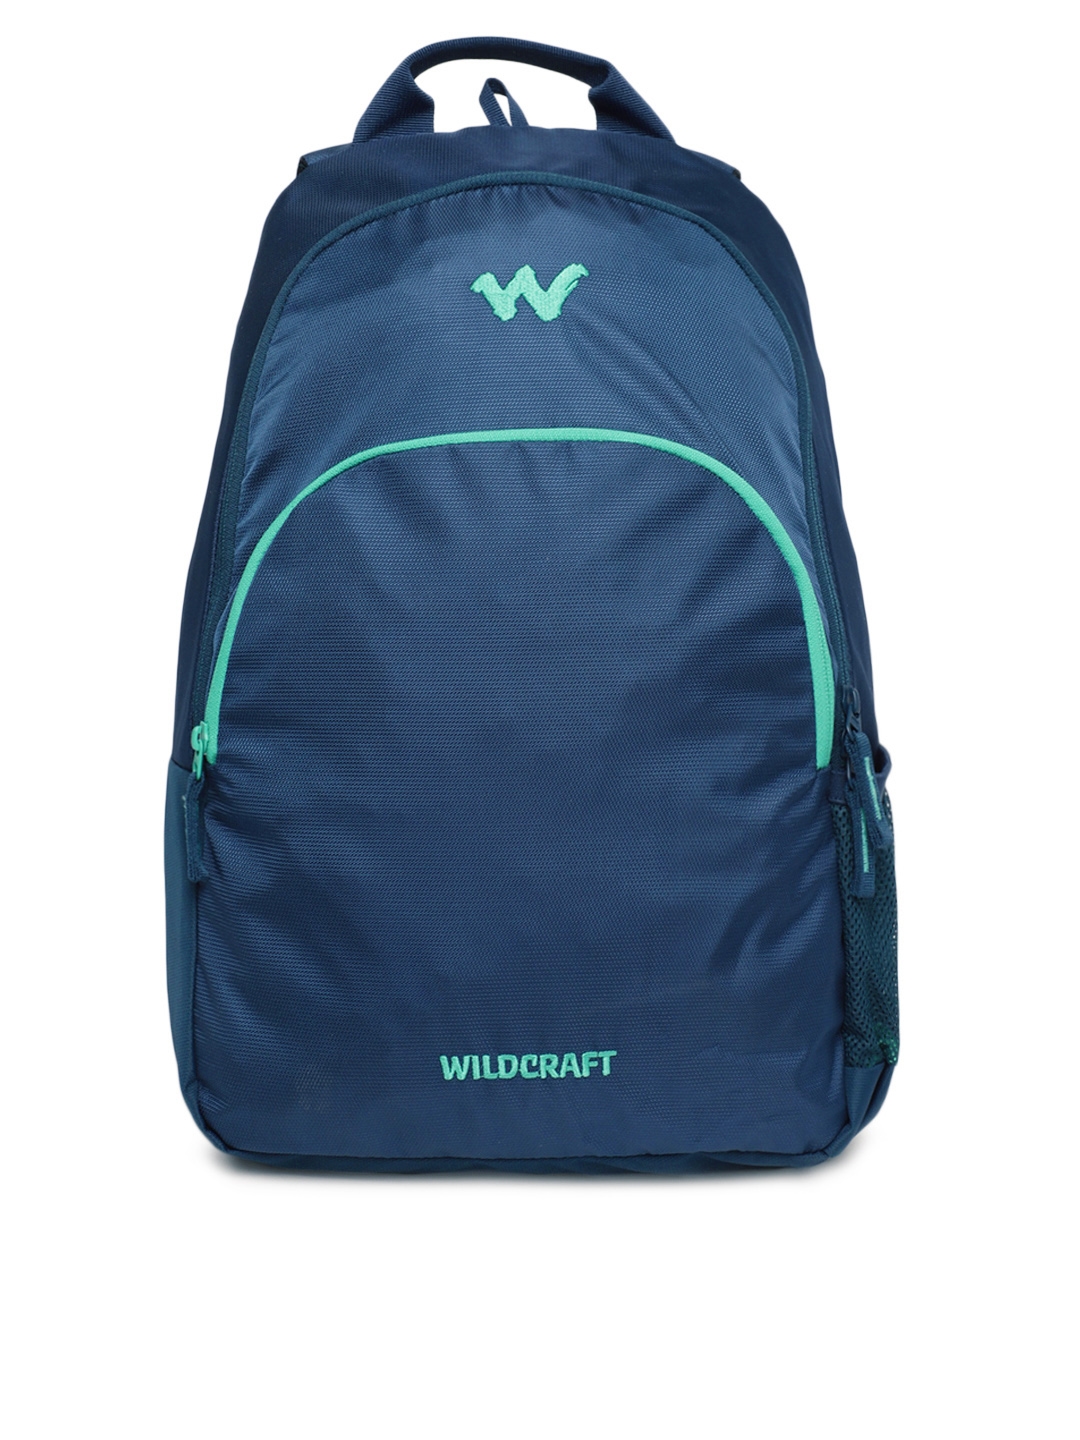 Wildcraft Grab it Plus Unisex Sling and Cross Bags (M): Buy Wildcraft Grab  it Plus Unisex Sling and Cross Bags (M) Online at Best Price in India |  Nykaa